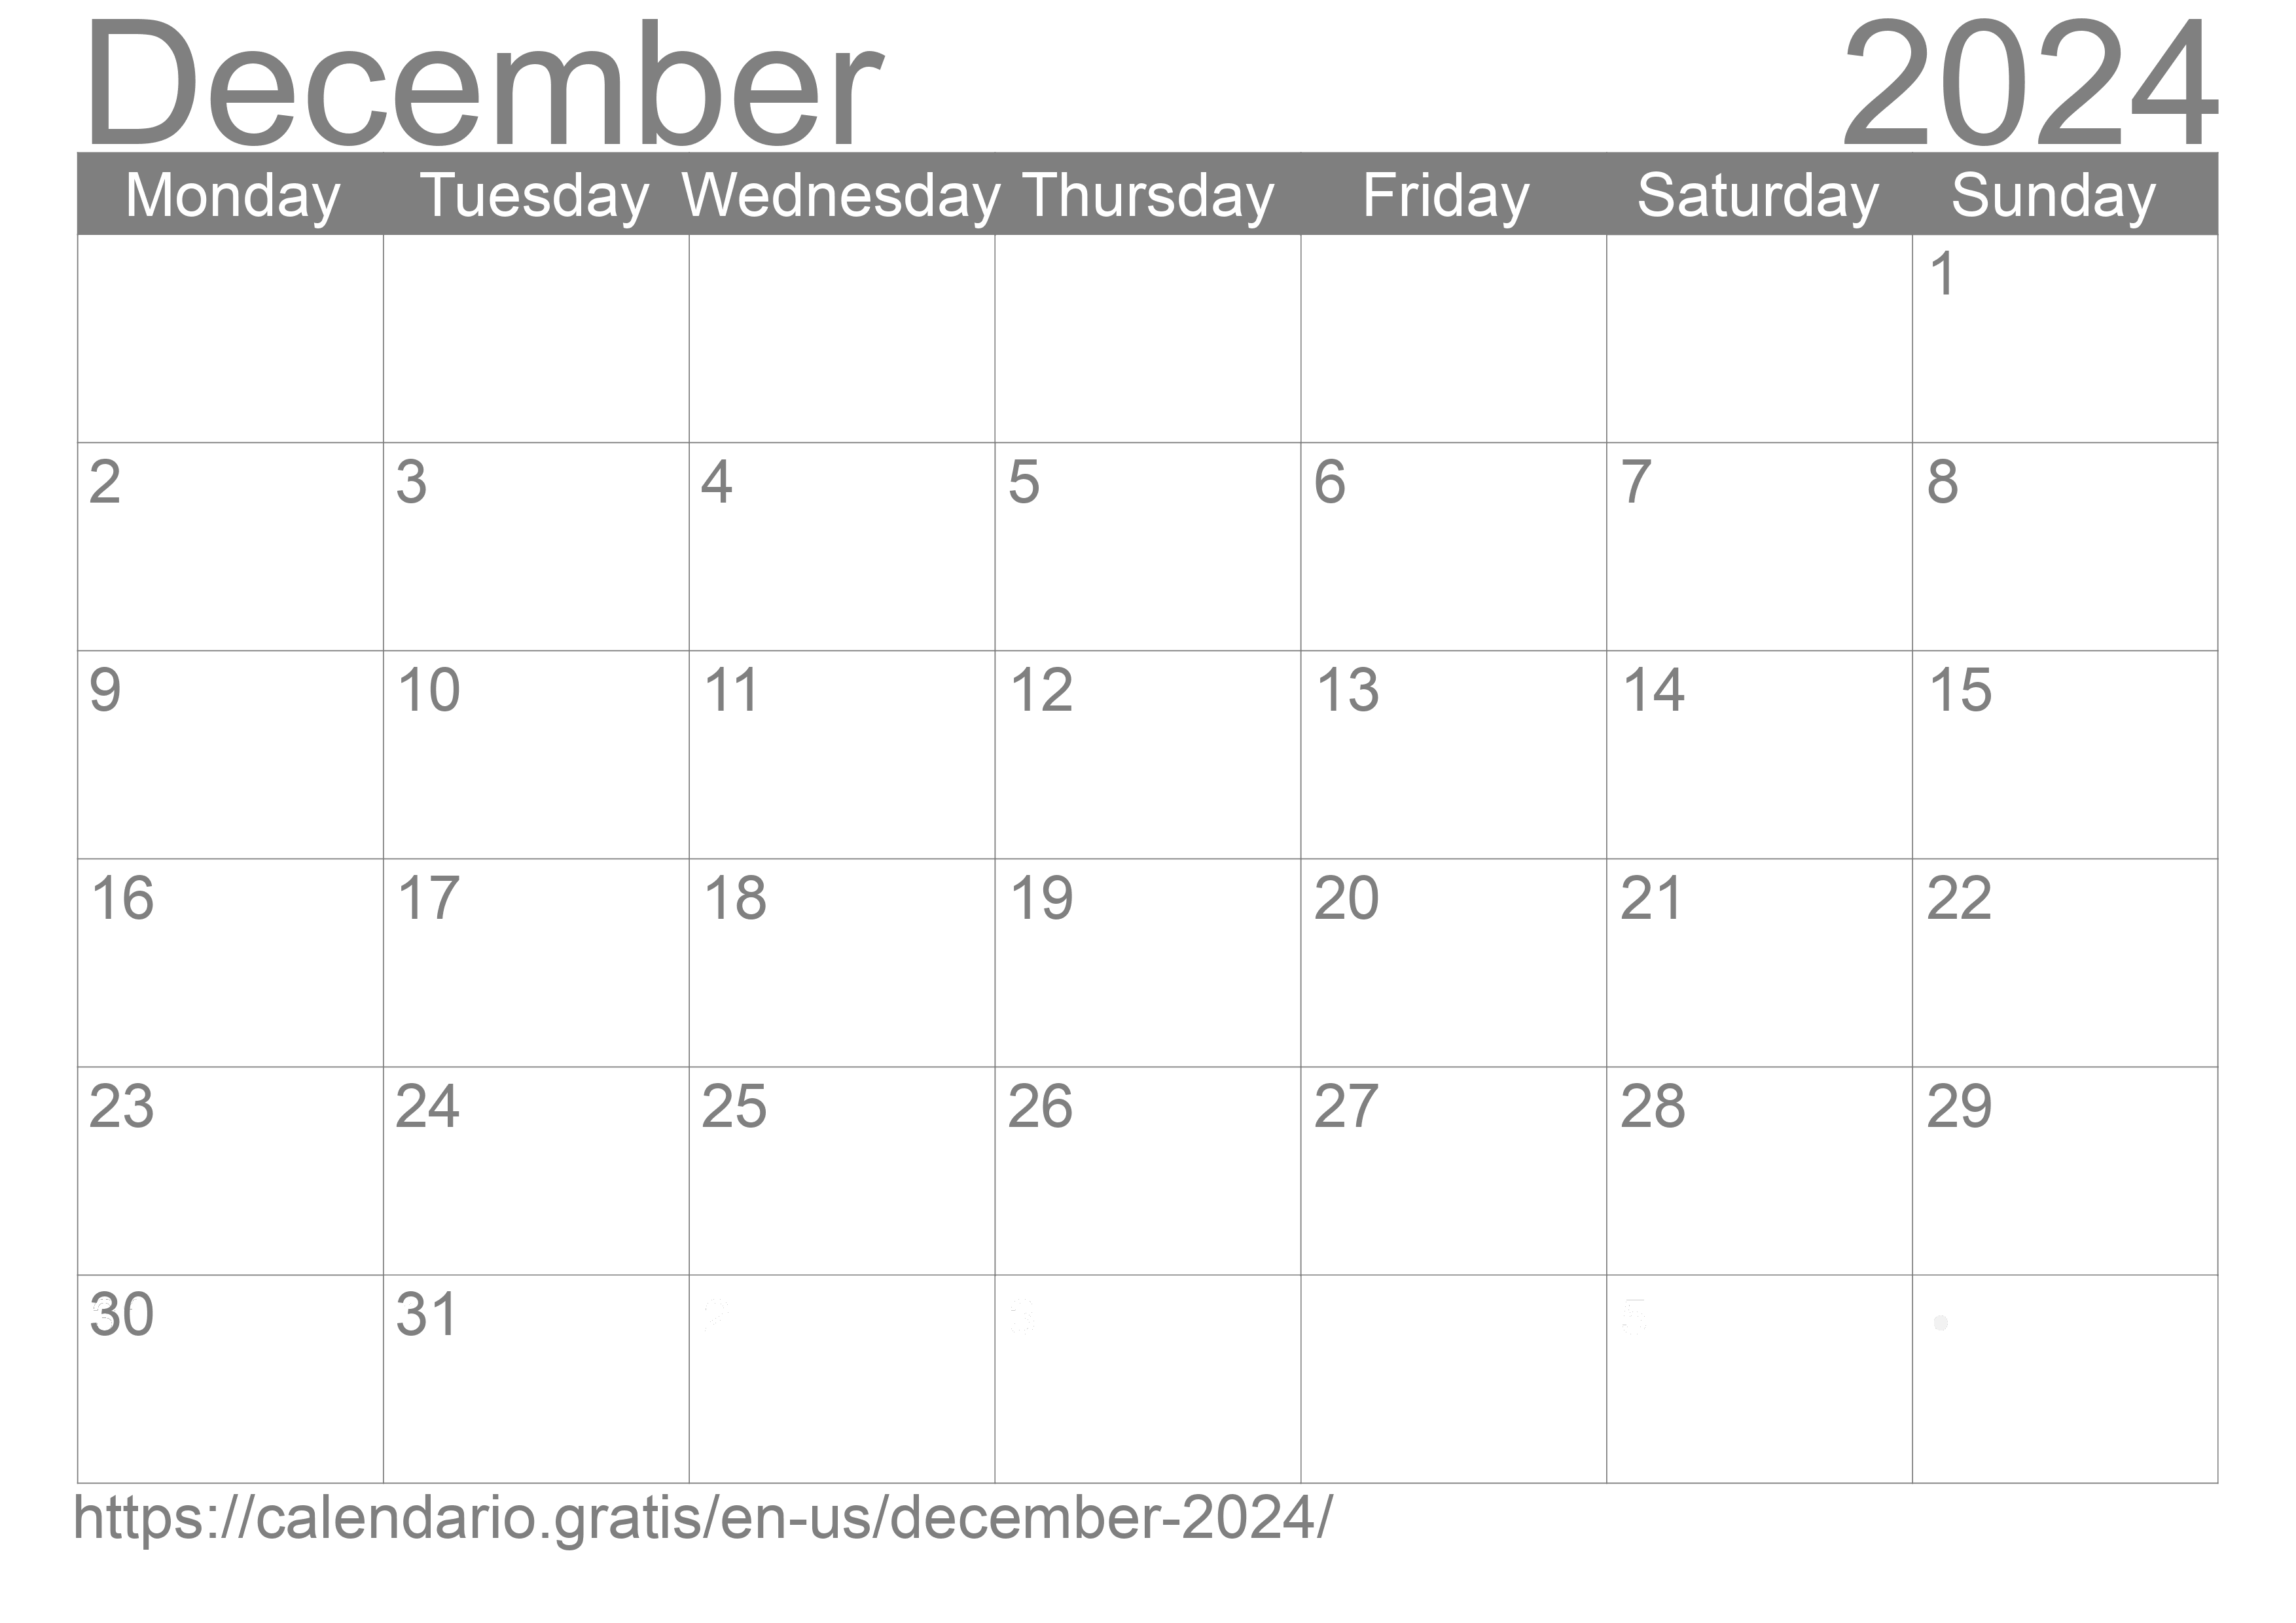 Calendar December 2024 from United States of America in English ☑️